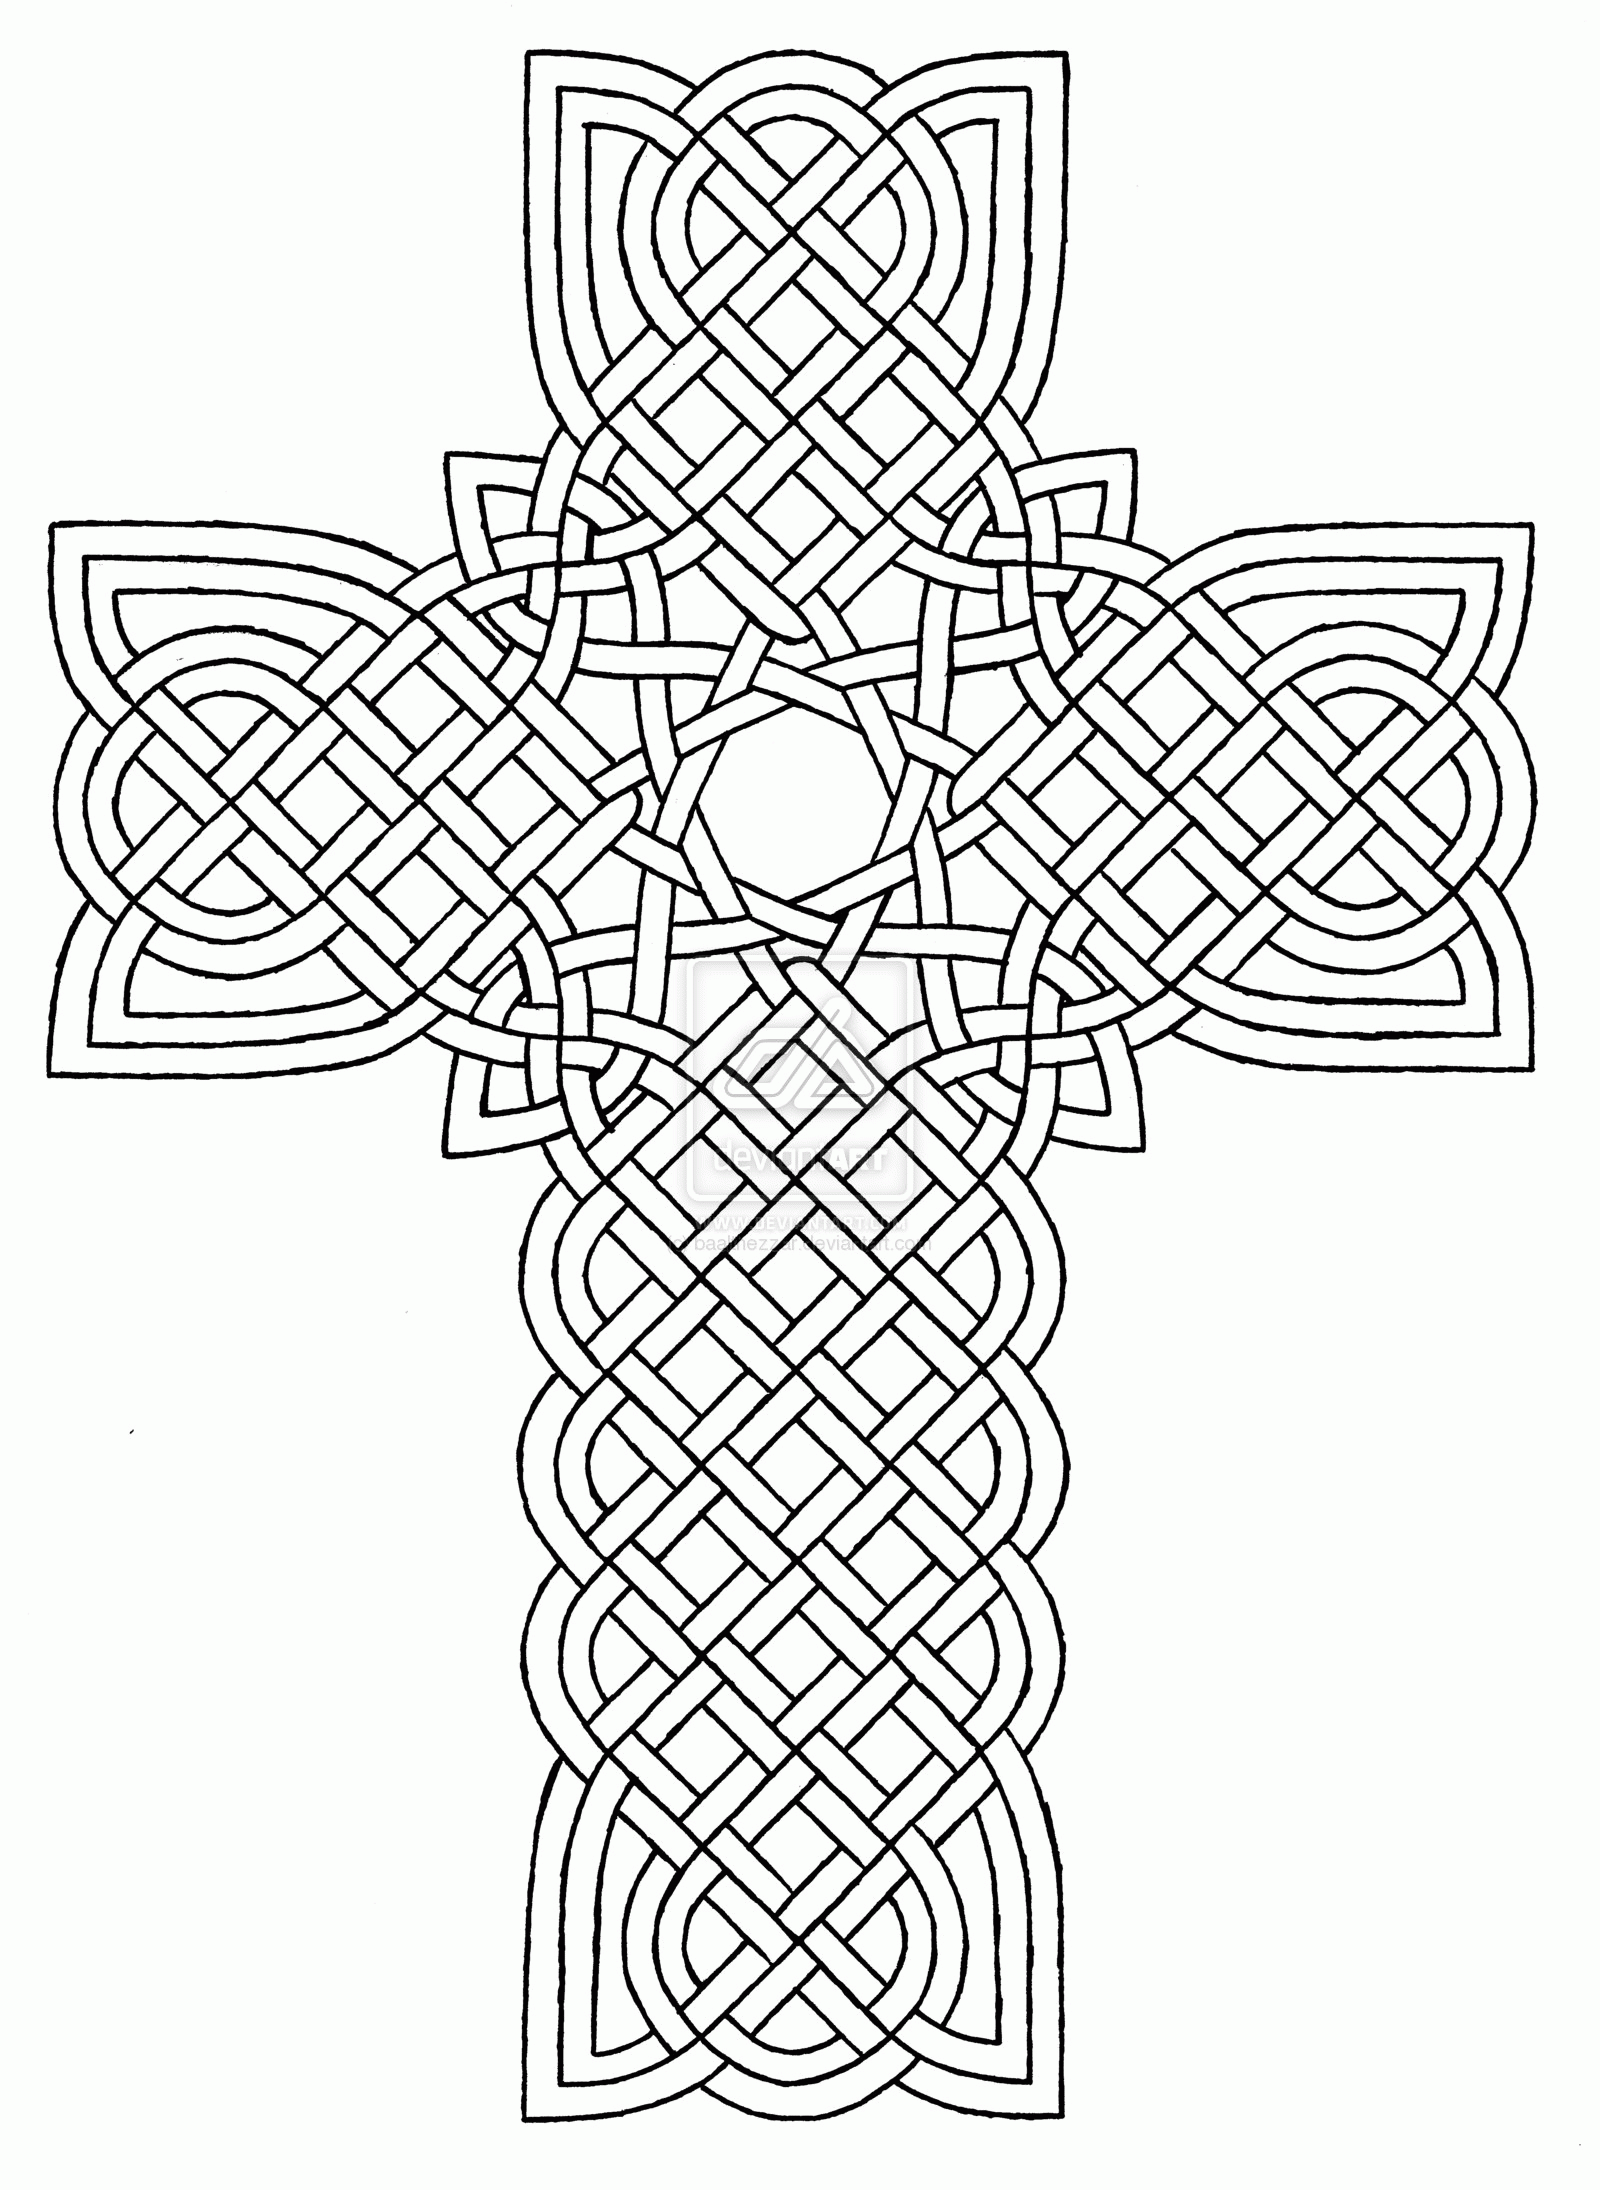 17 Pics of Celtic Cross With Rose Coloring Pages - Celtic Crosses ...